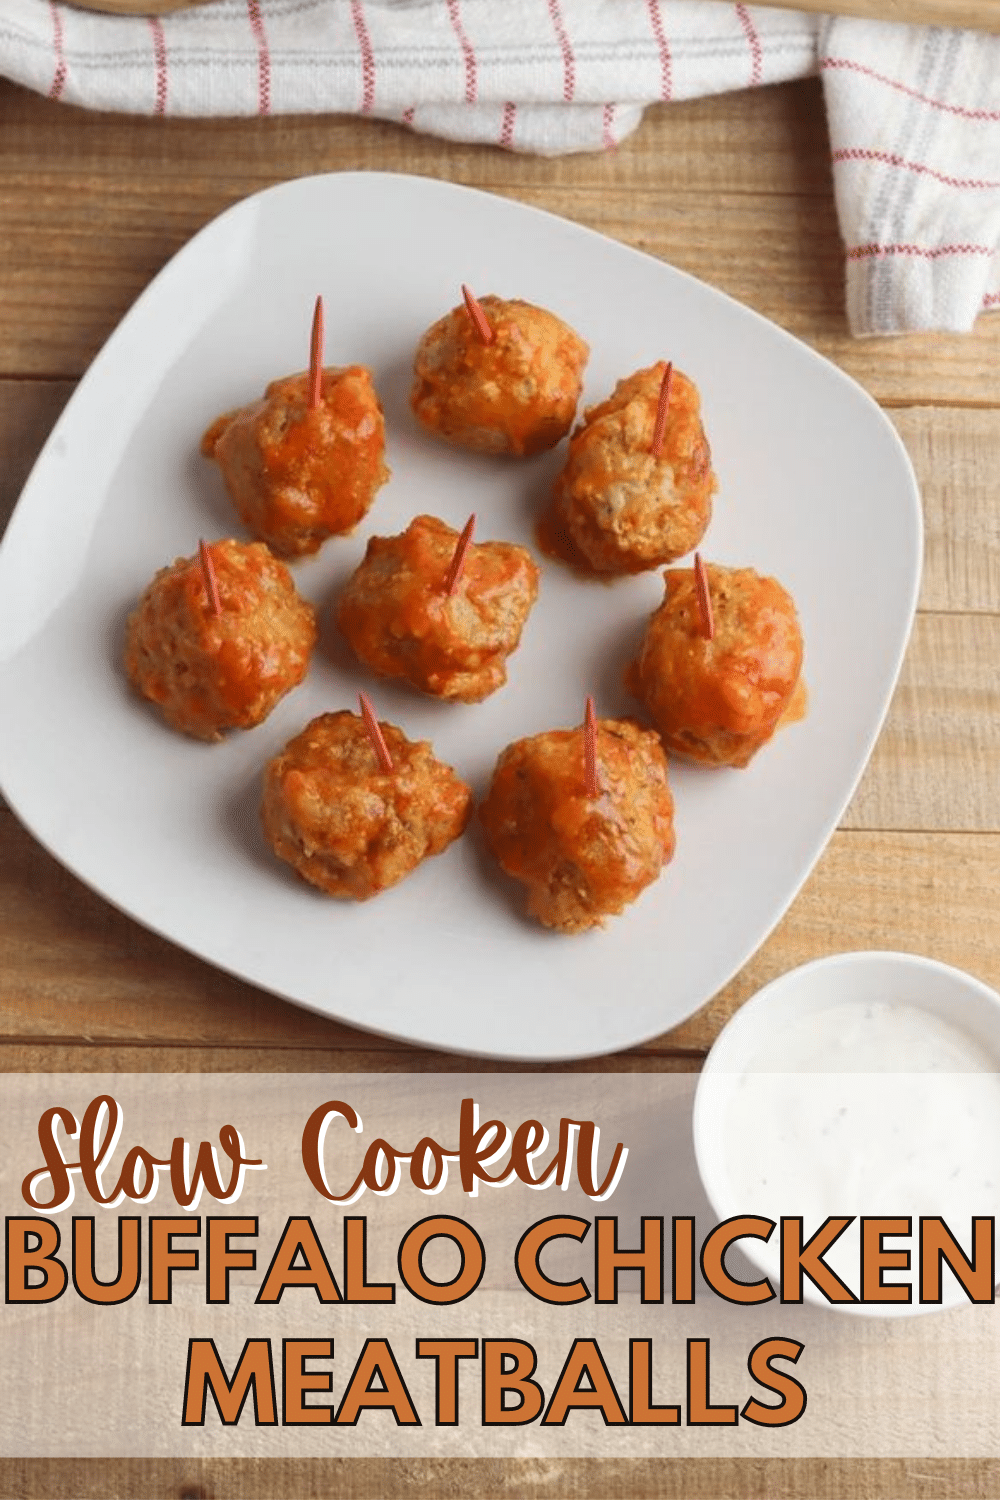 This slow cooker buffalo chicken meatball recipe is bold and delicious. The chicken meatballs make a great party appetizer or main dish recipe. #buffalosauce #meatballs #slowcooker via @wondermomwannab